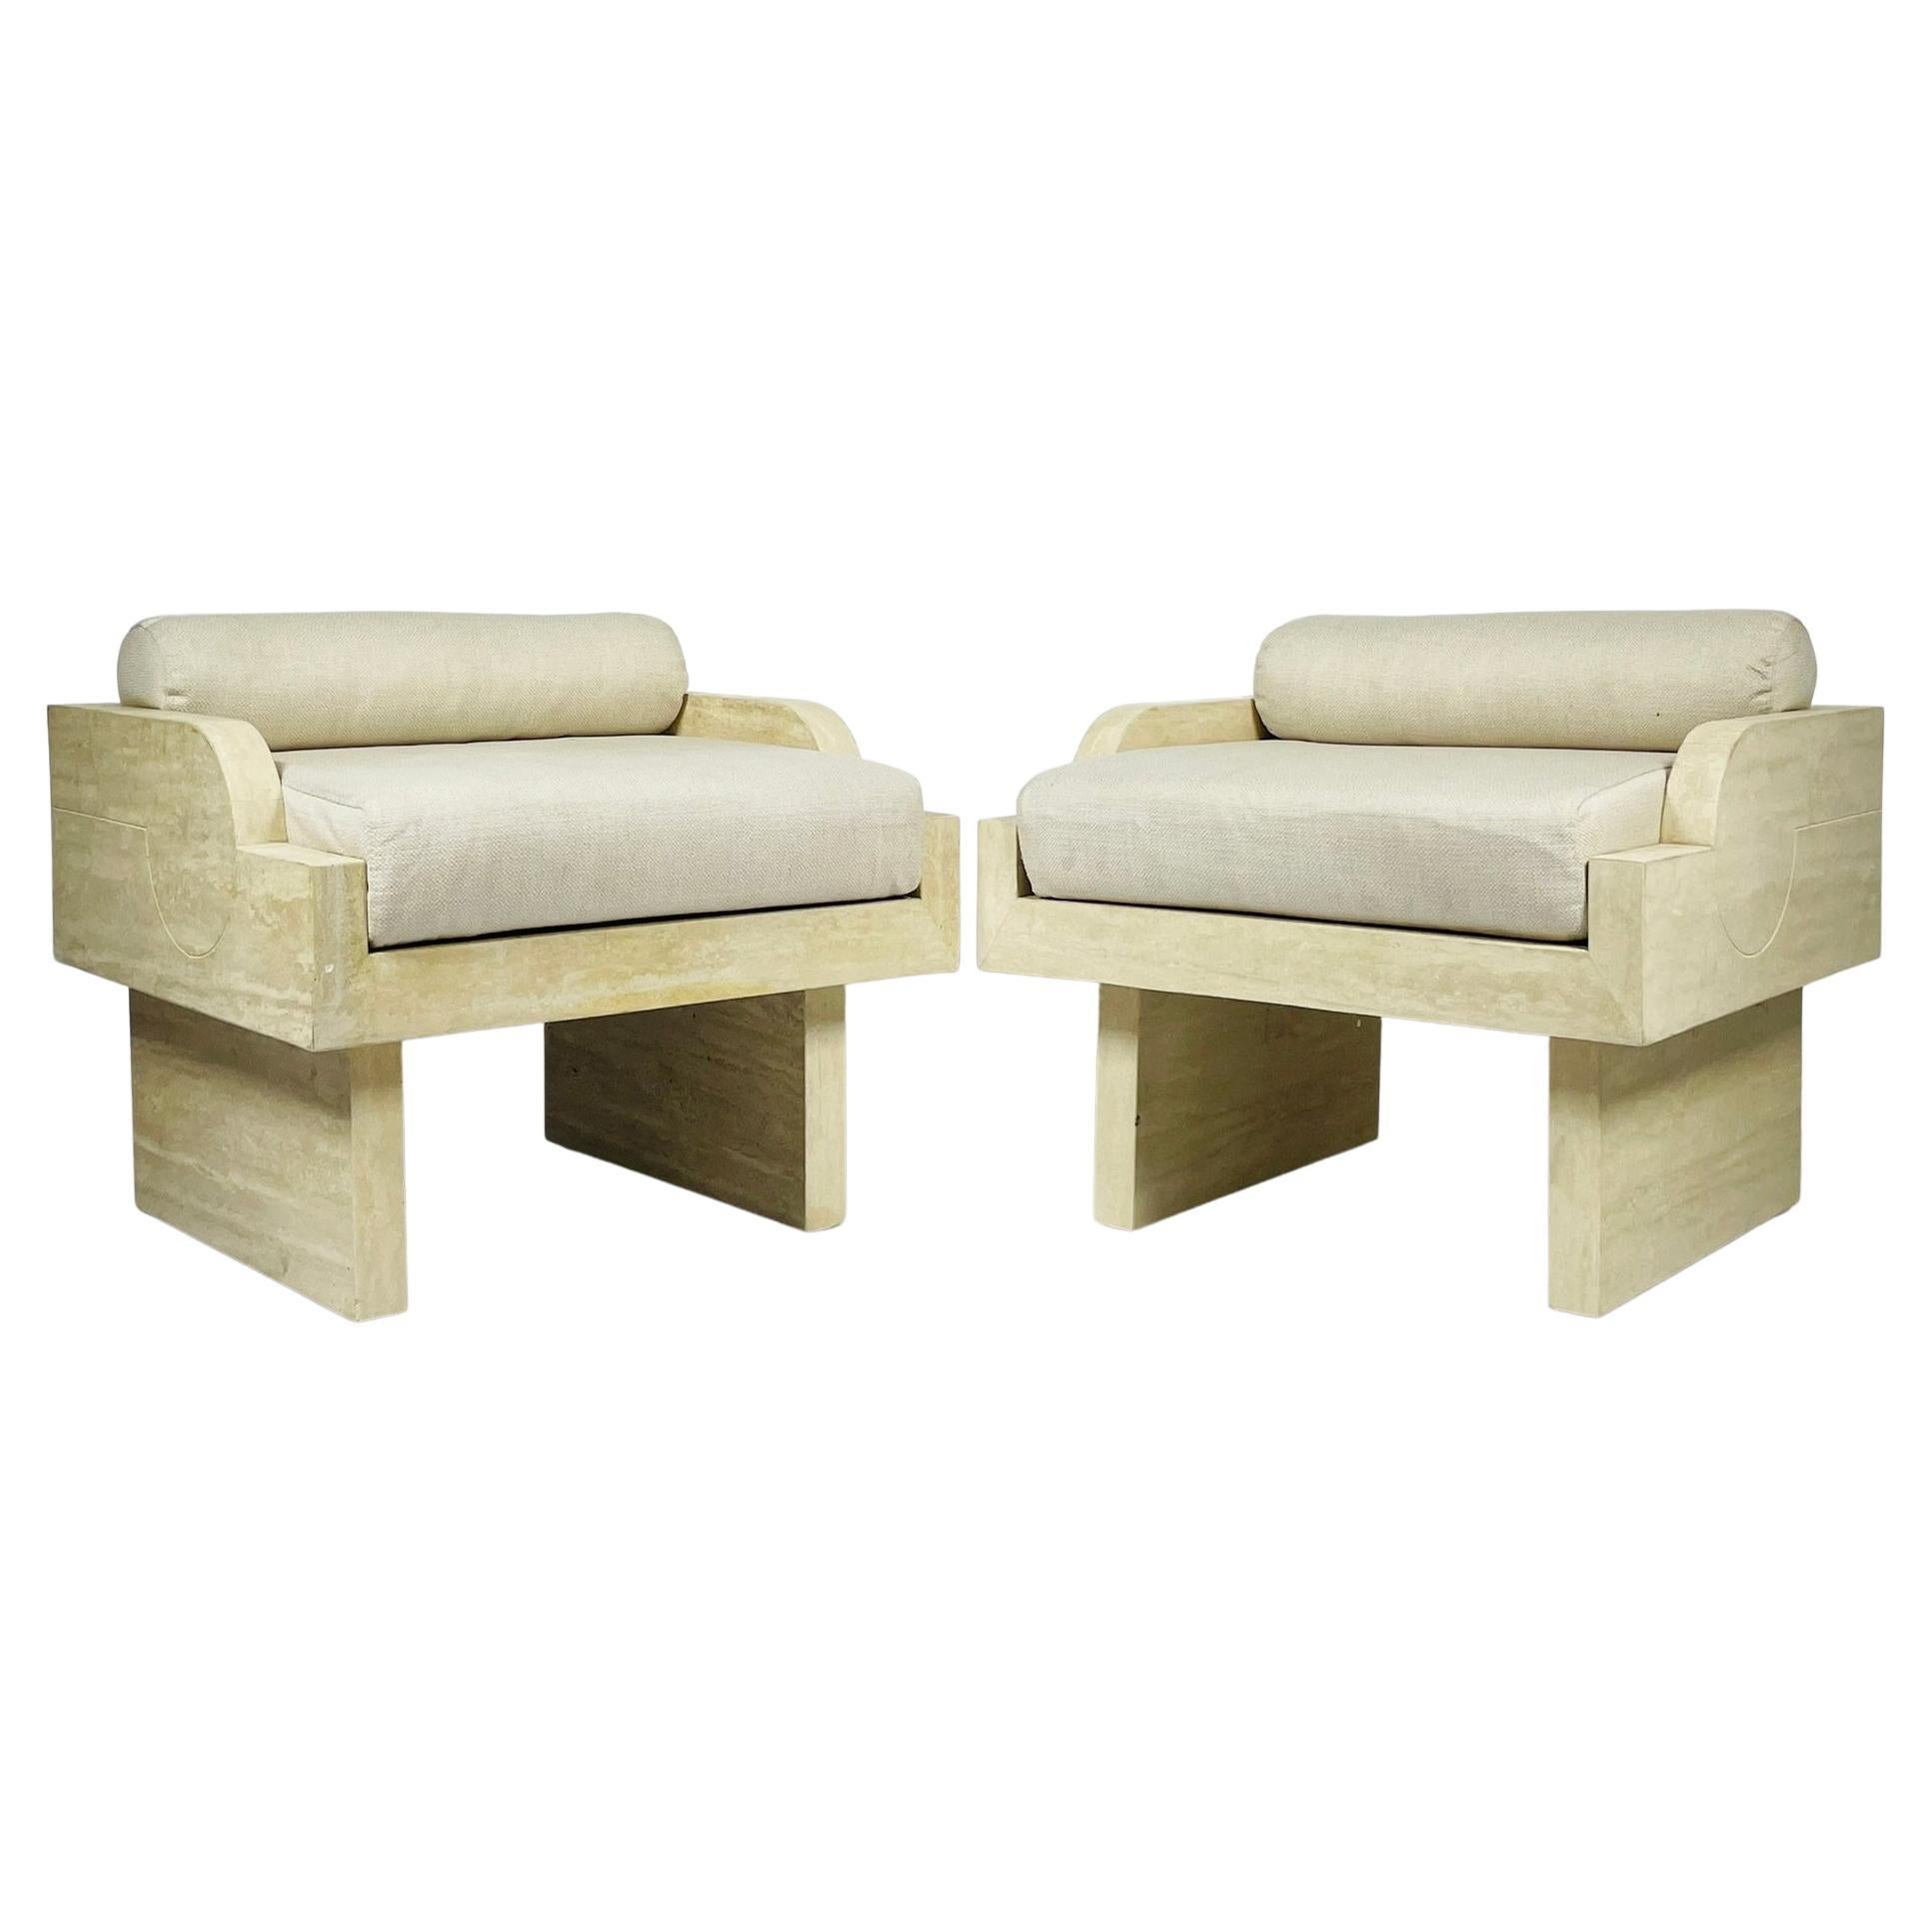 Pair of Travertine Arm Chairs Attb to Stéphane Parmentier For Sale